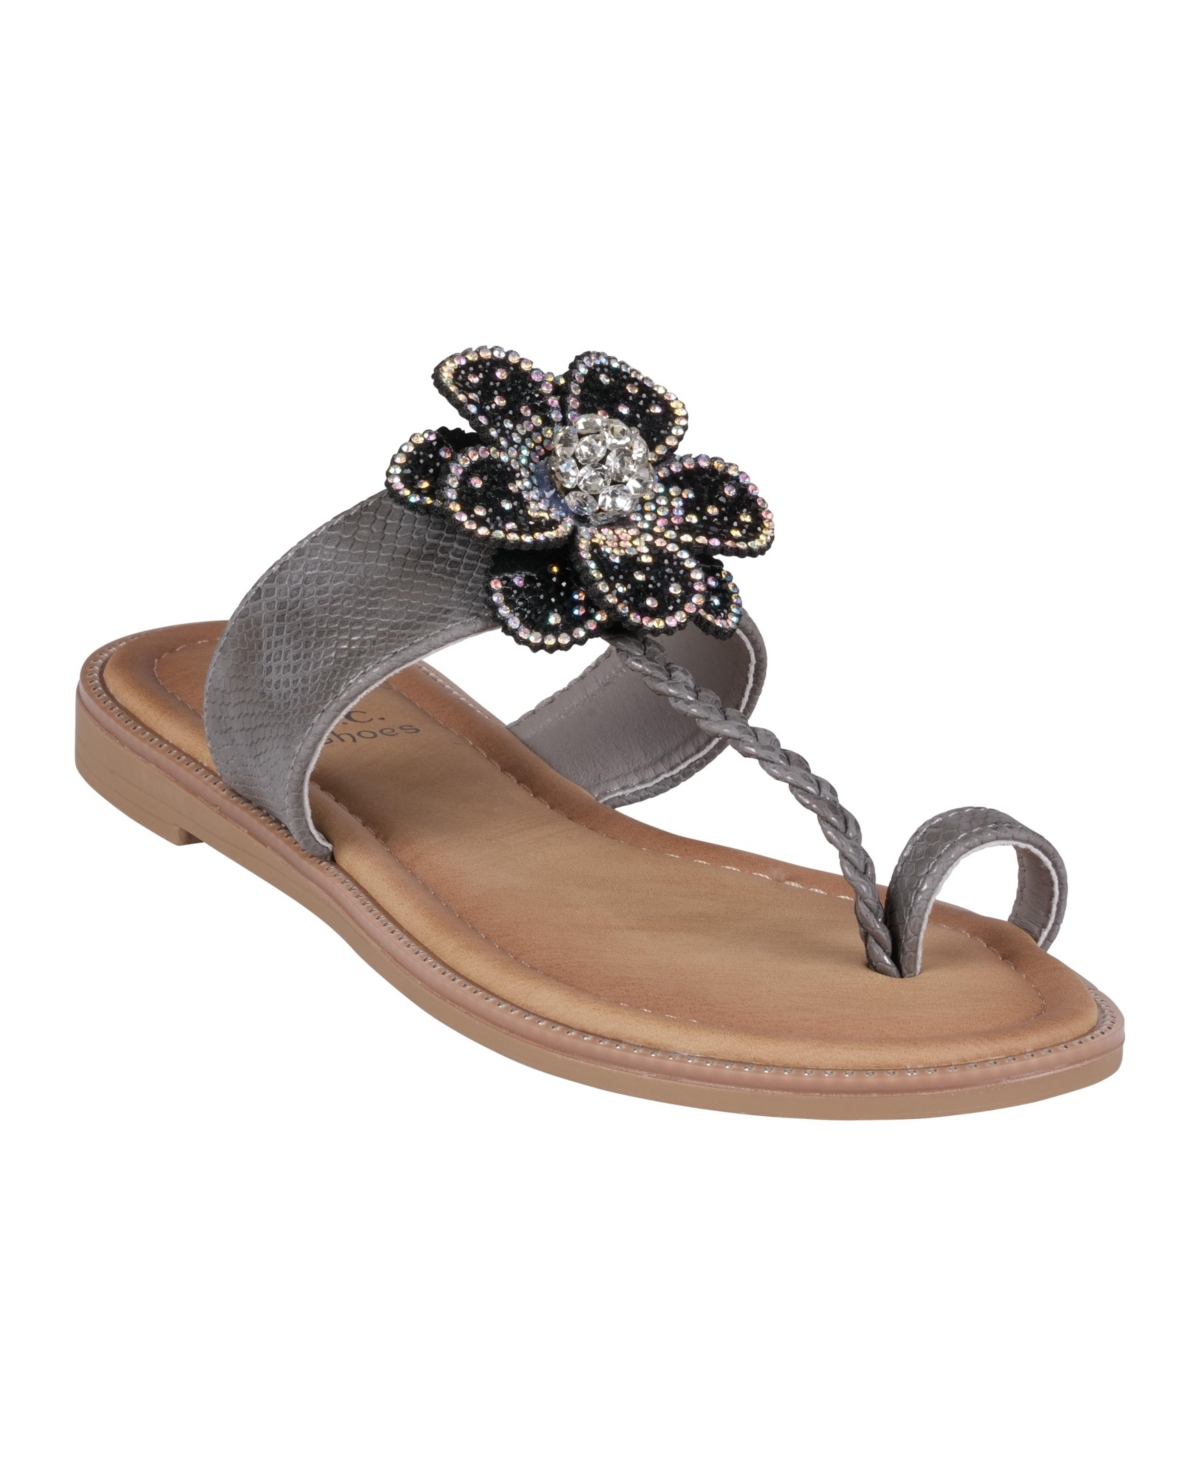 Gc Shoes Women's Blossom Flower Embellished Toe Ring Flat Sandals In Pewter